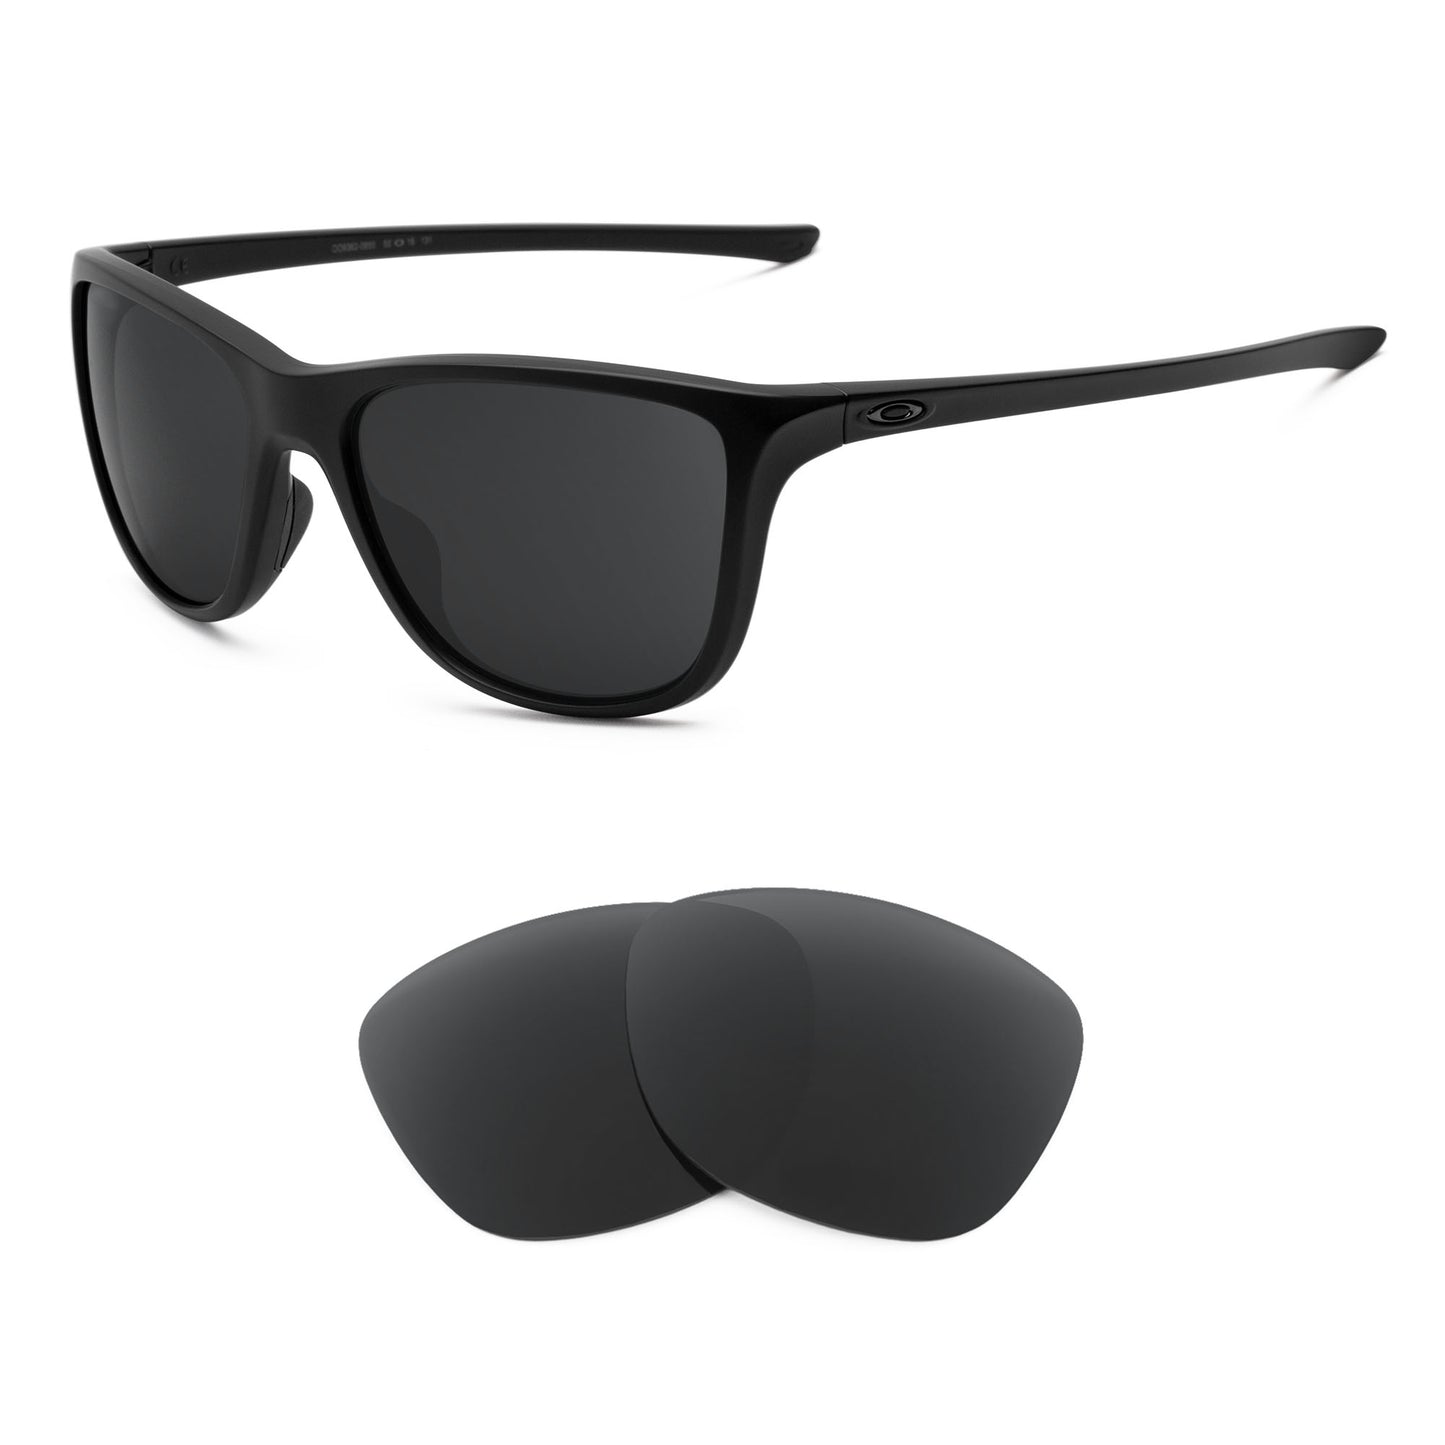 Oakley Reverie sunglasses with replacement lenses